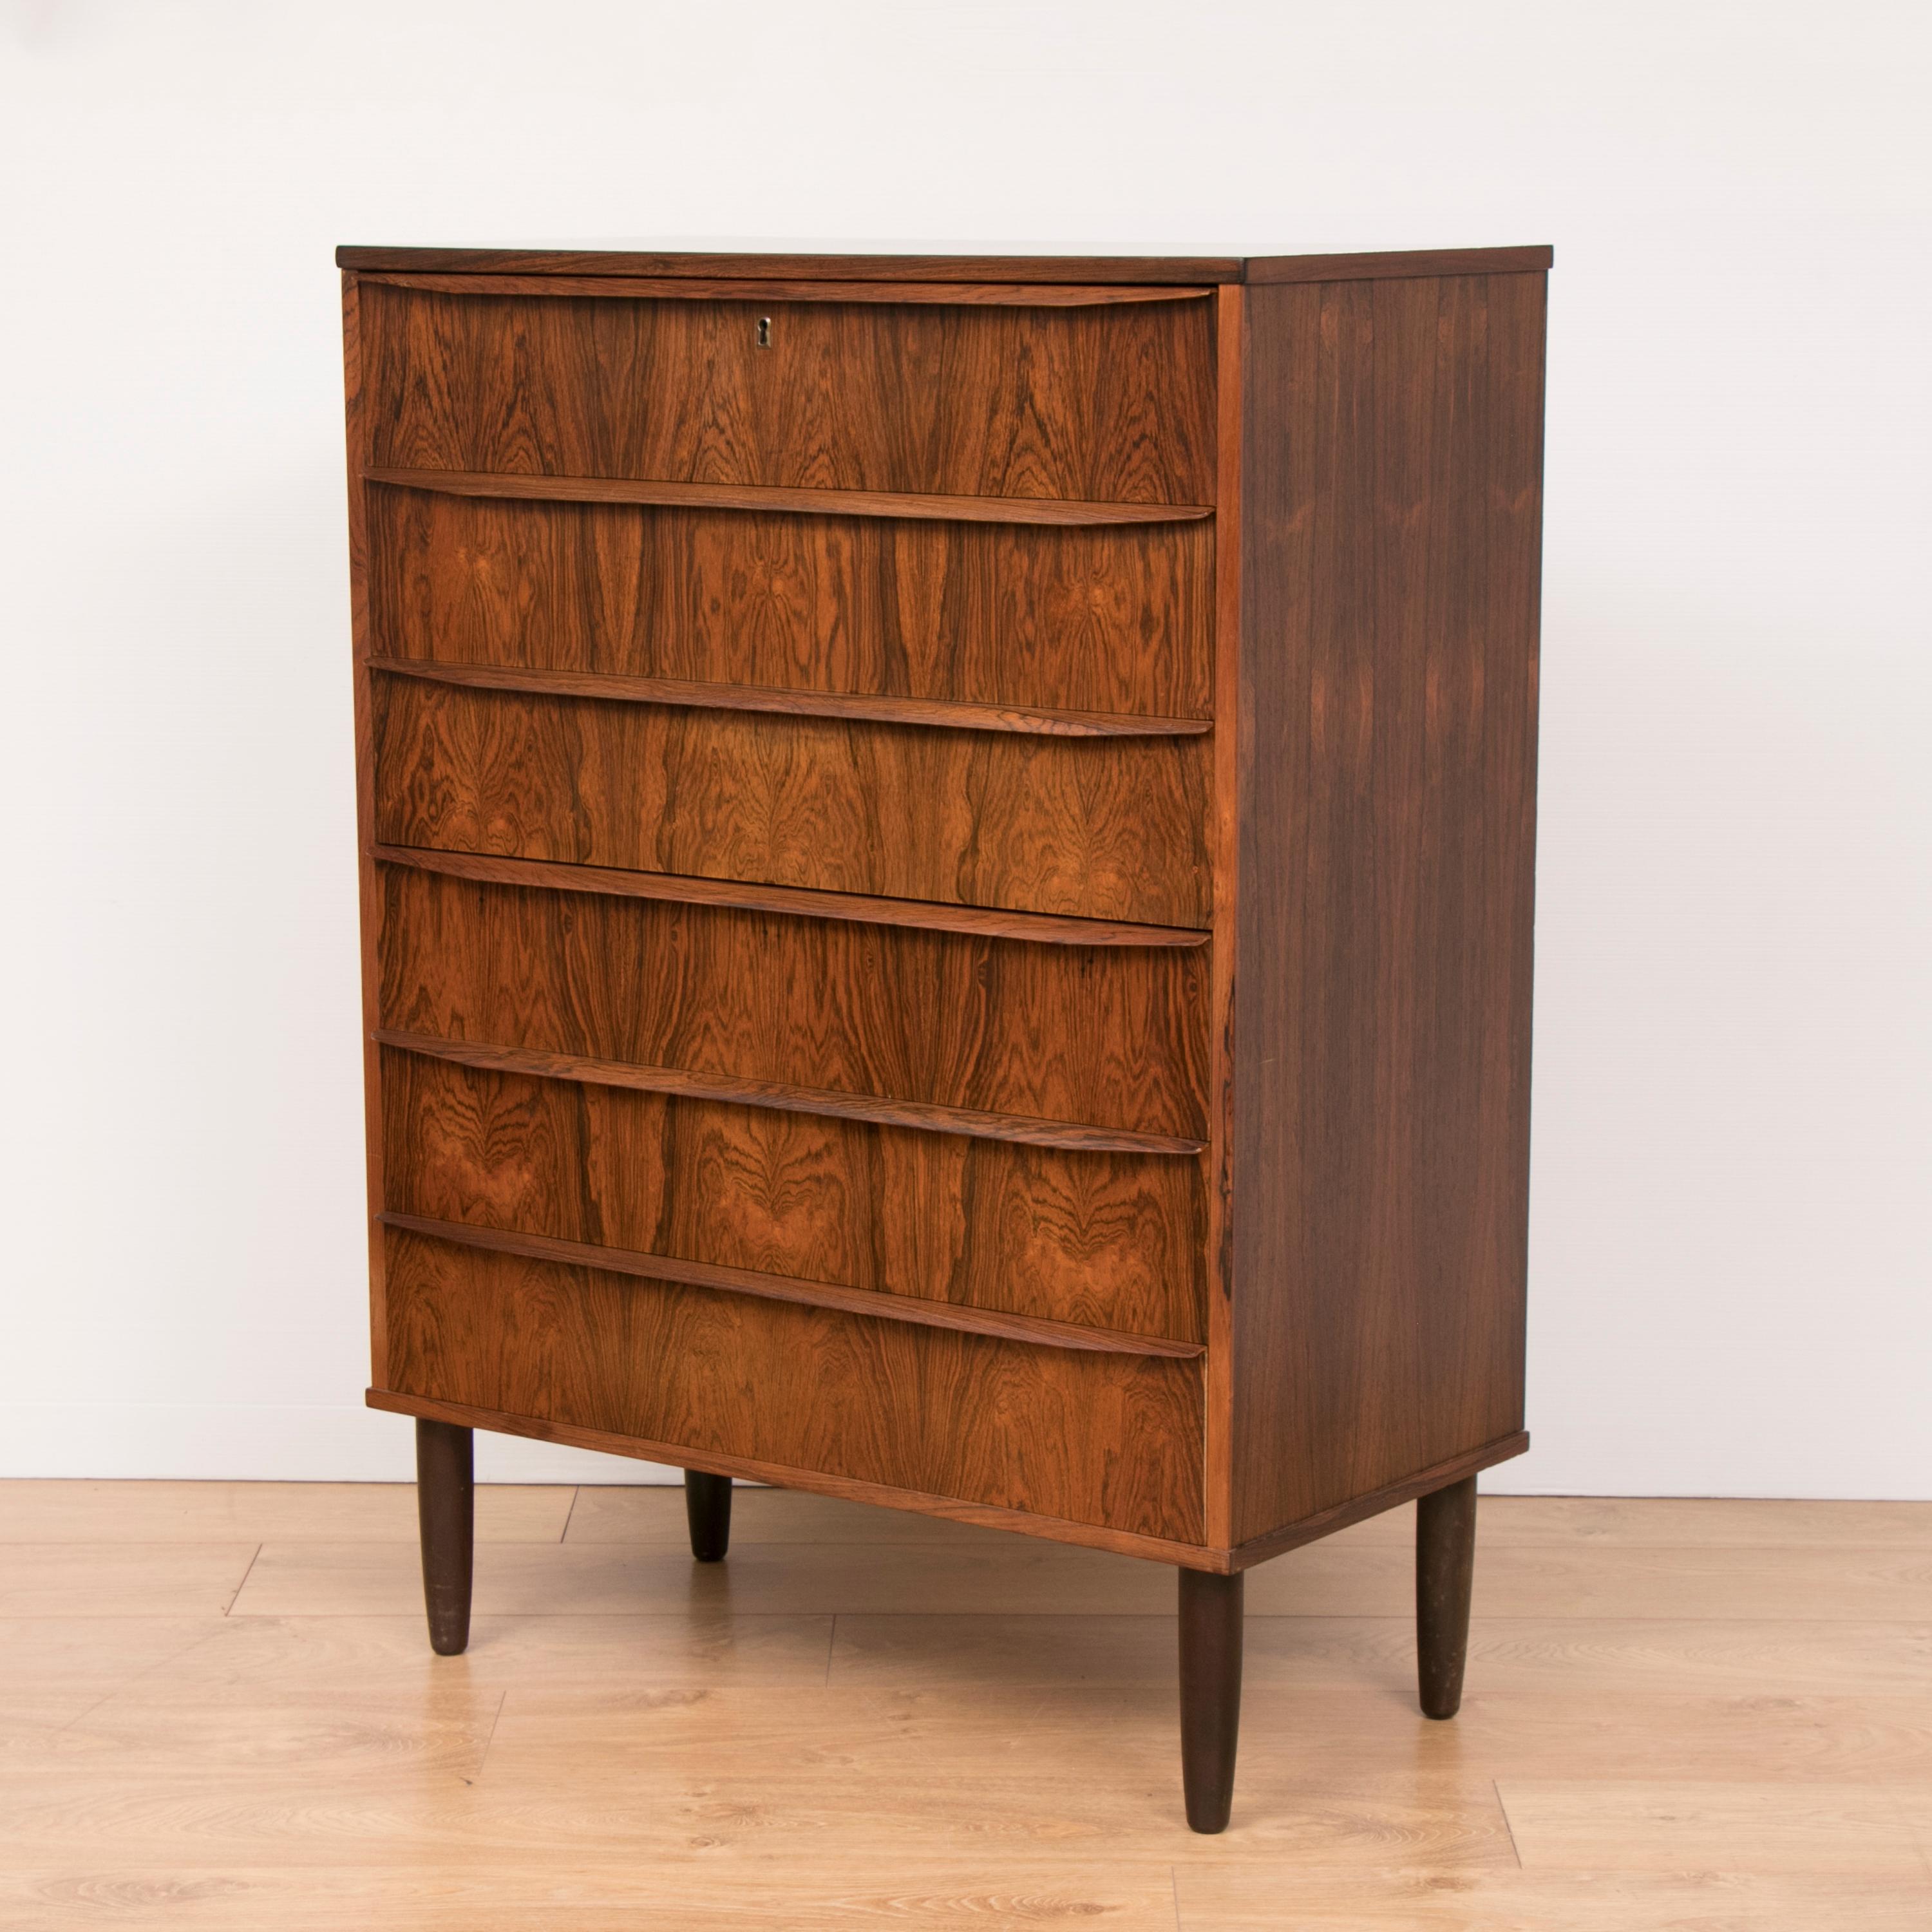 1960s Danish midcentury Brazilian rosewood chest of six-drawers with a matching grain pattern on the front of each drawer. Long lip handles run along the whole length of each drawer. The top drawer is lockable with a brass feature lock and key. The